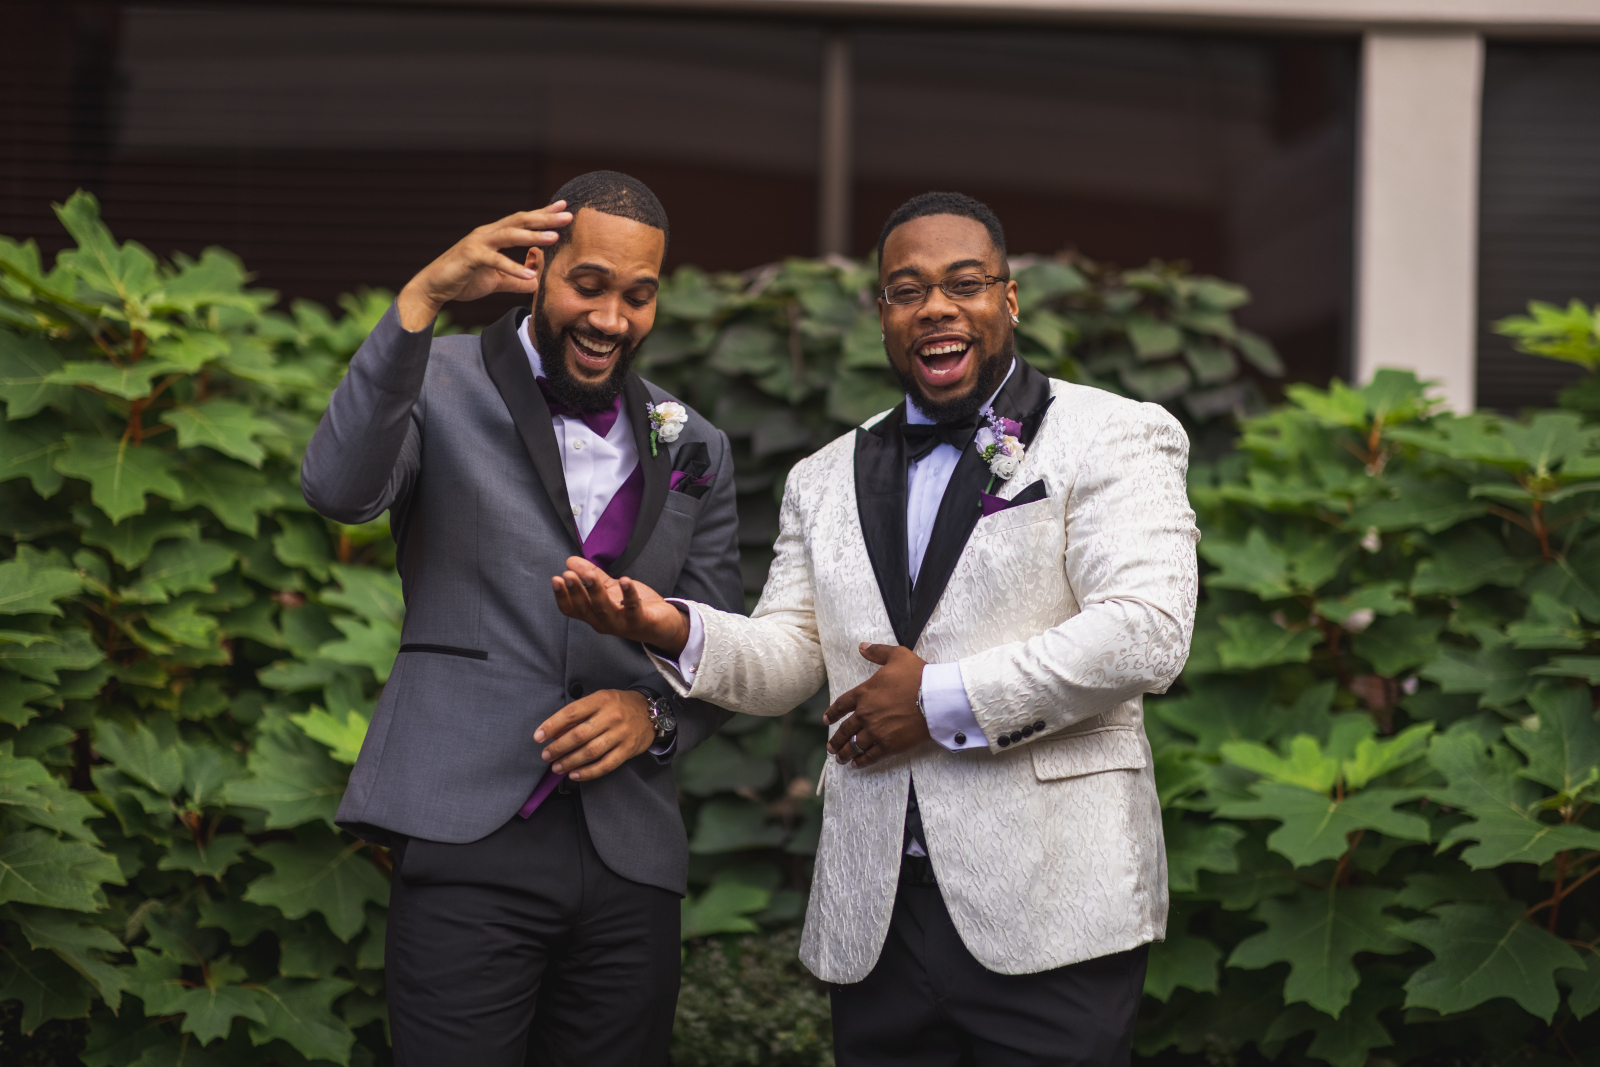 Groom with groomsman, fun bridal party portrait, green bushes, nature, African American groom, African American wedding, romantic wedding ceremony at Hilton Akron/Fairlawn